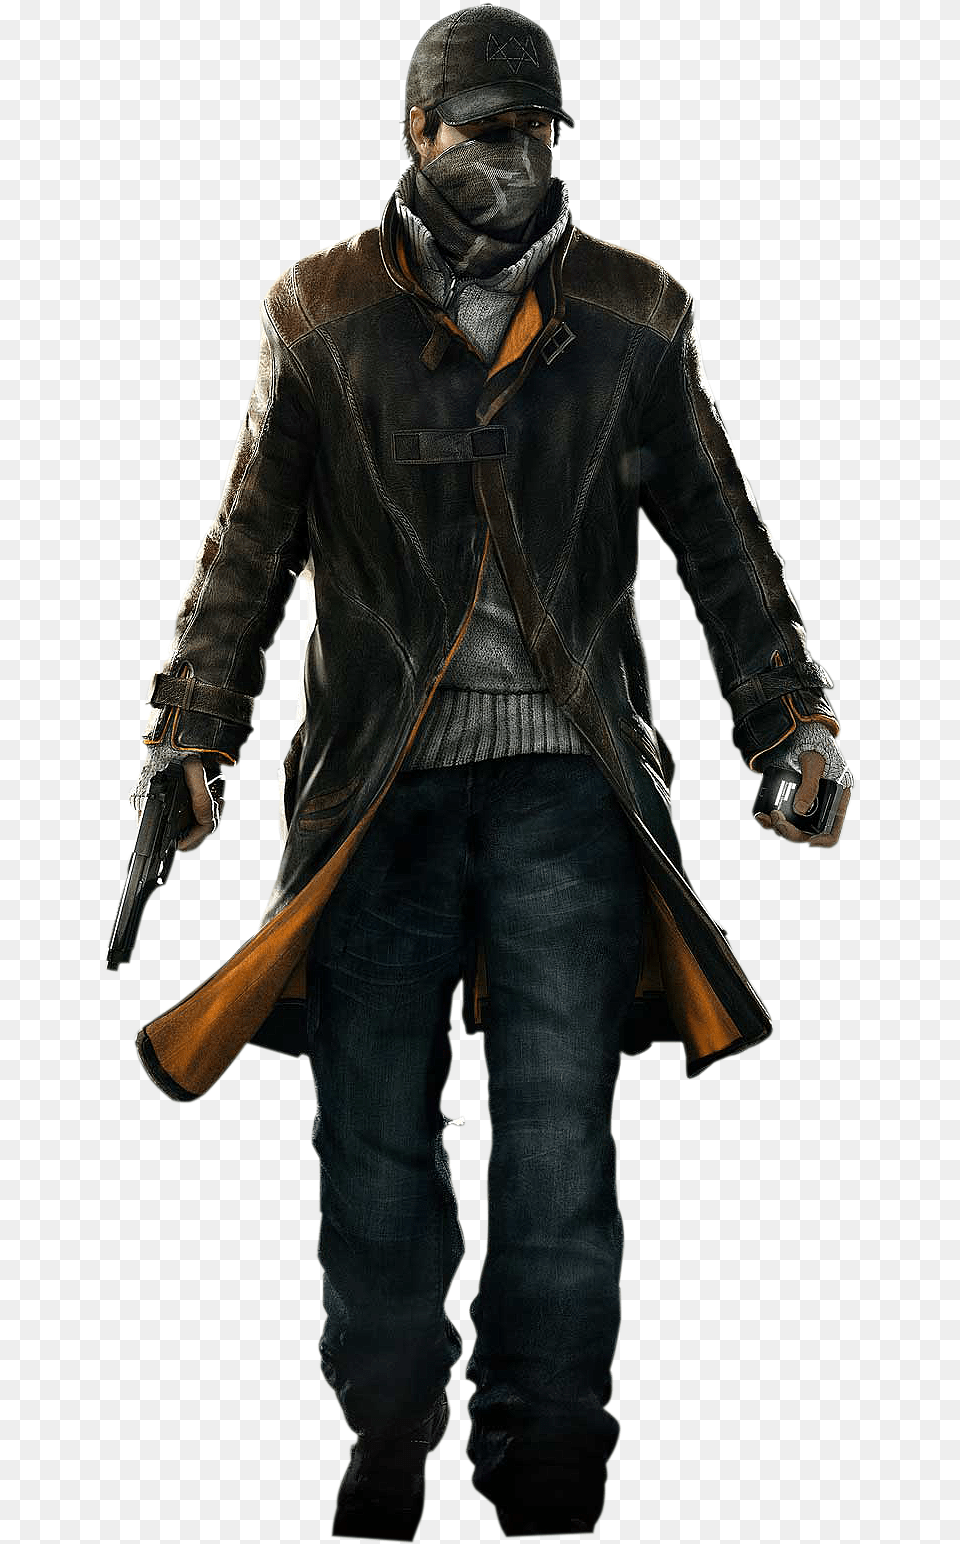 Watch Dogs Aiden Pearce, Clothing, Coat, Jacket, Firearm Png Image